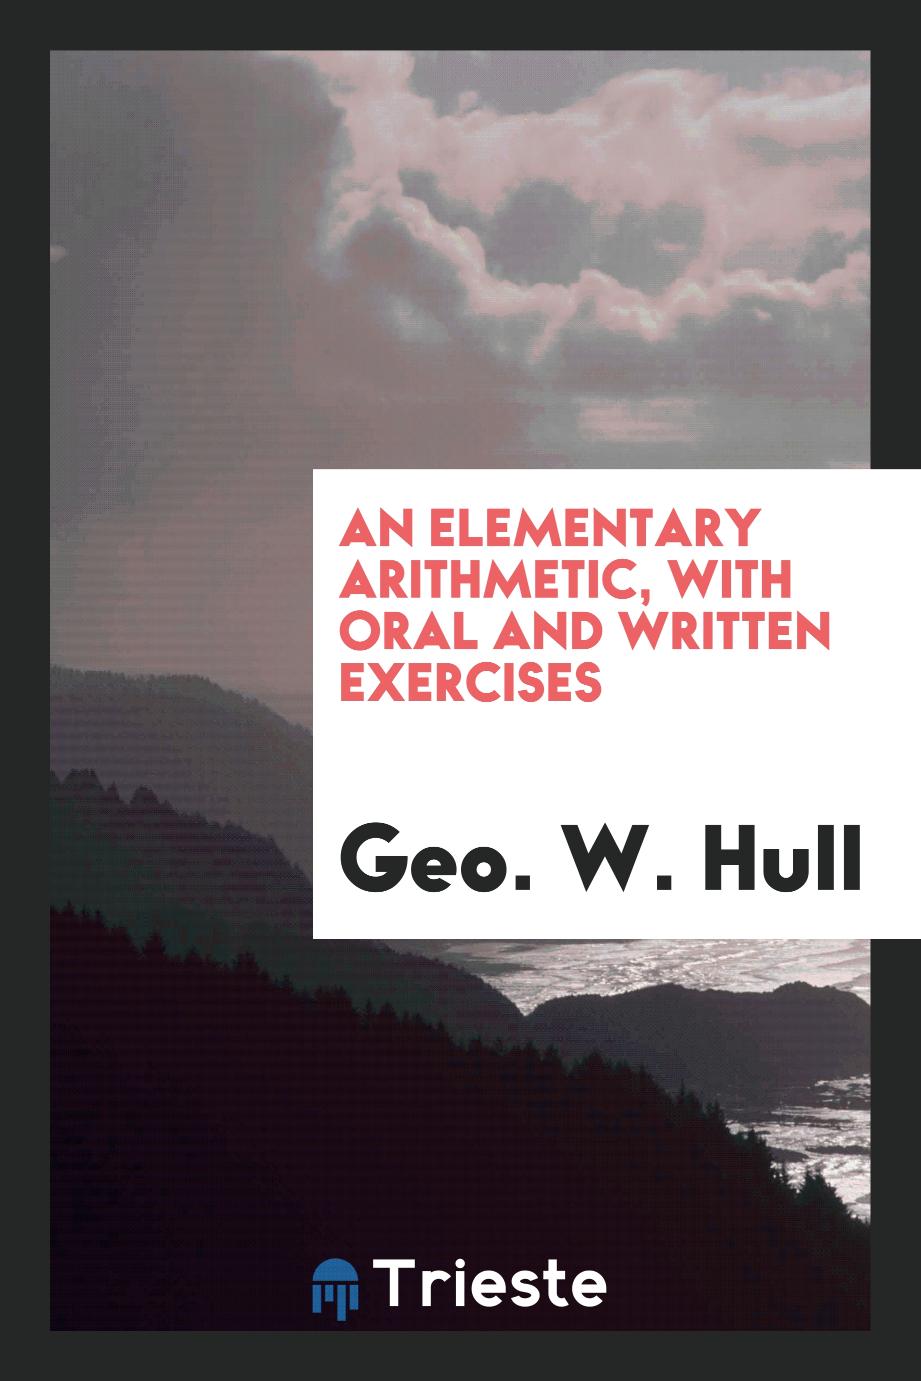 An Elementary Arithmetic, with Oral and Written Exercises